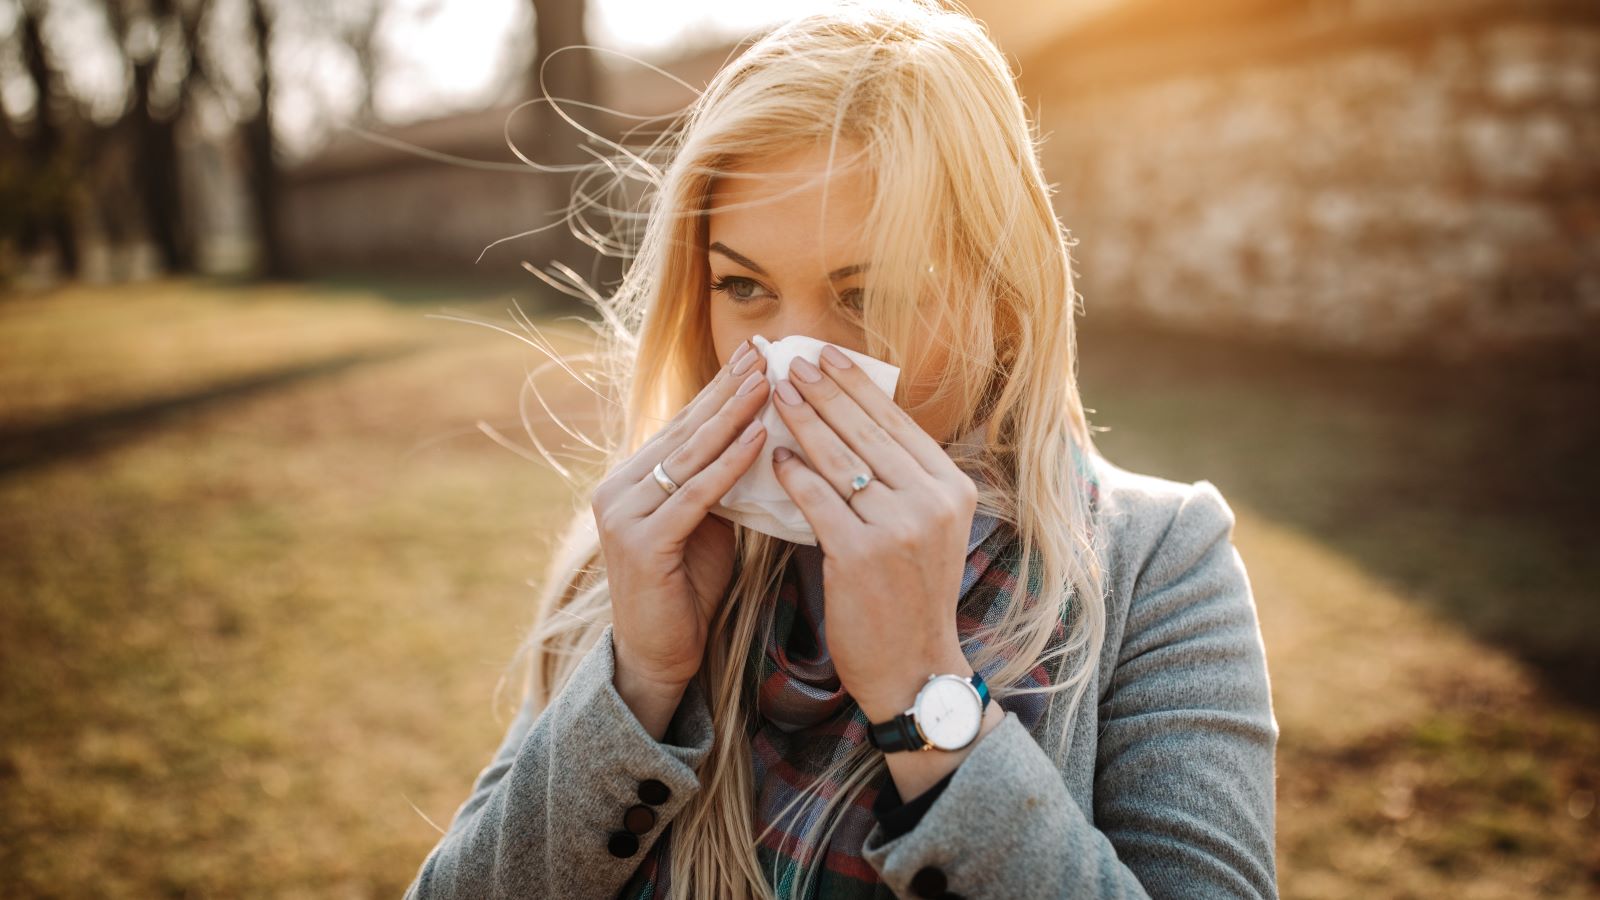 If you find your allergies are worse in the fall versus the spring (or vice versa), you might be on to something.